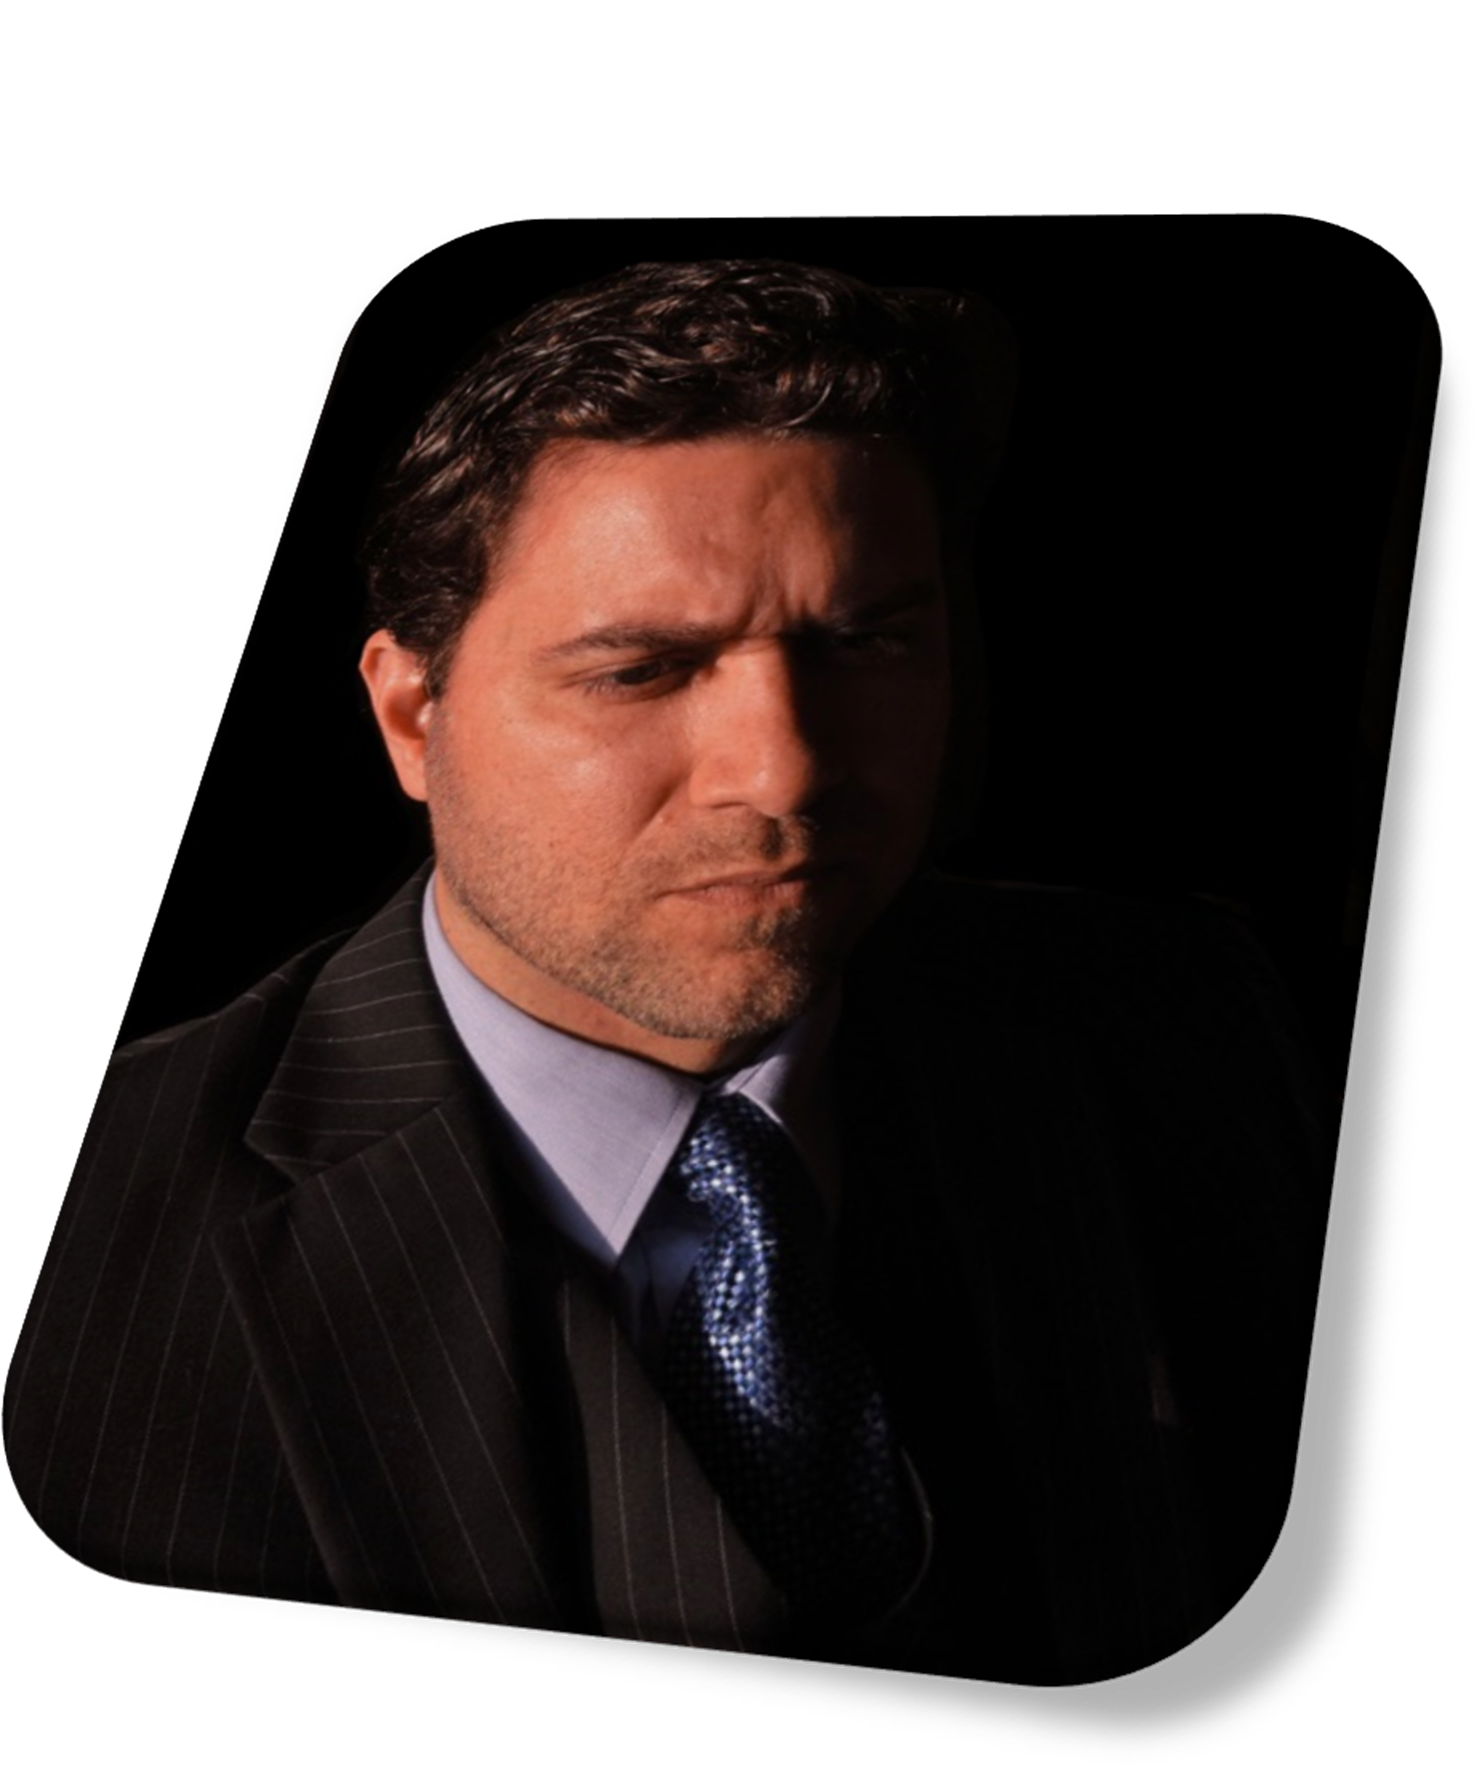 A person in a suit

Description automatically generated with medium confidence